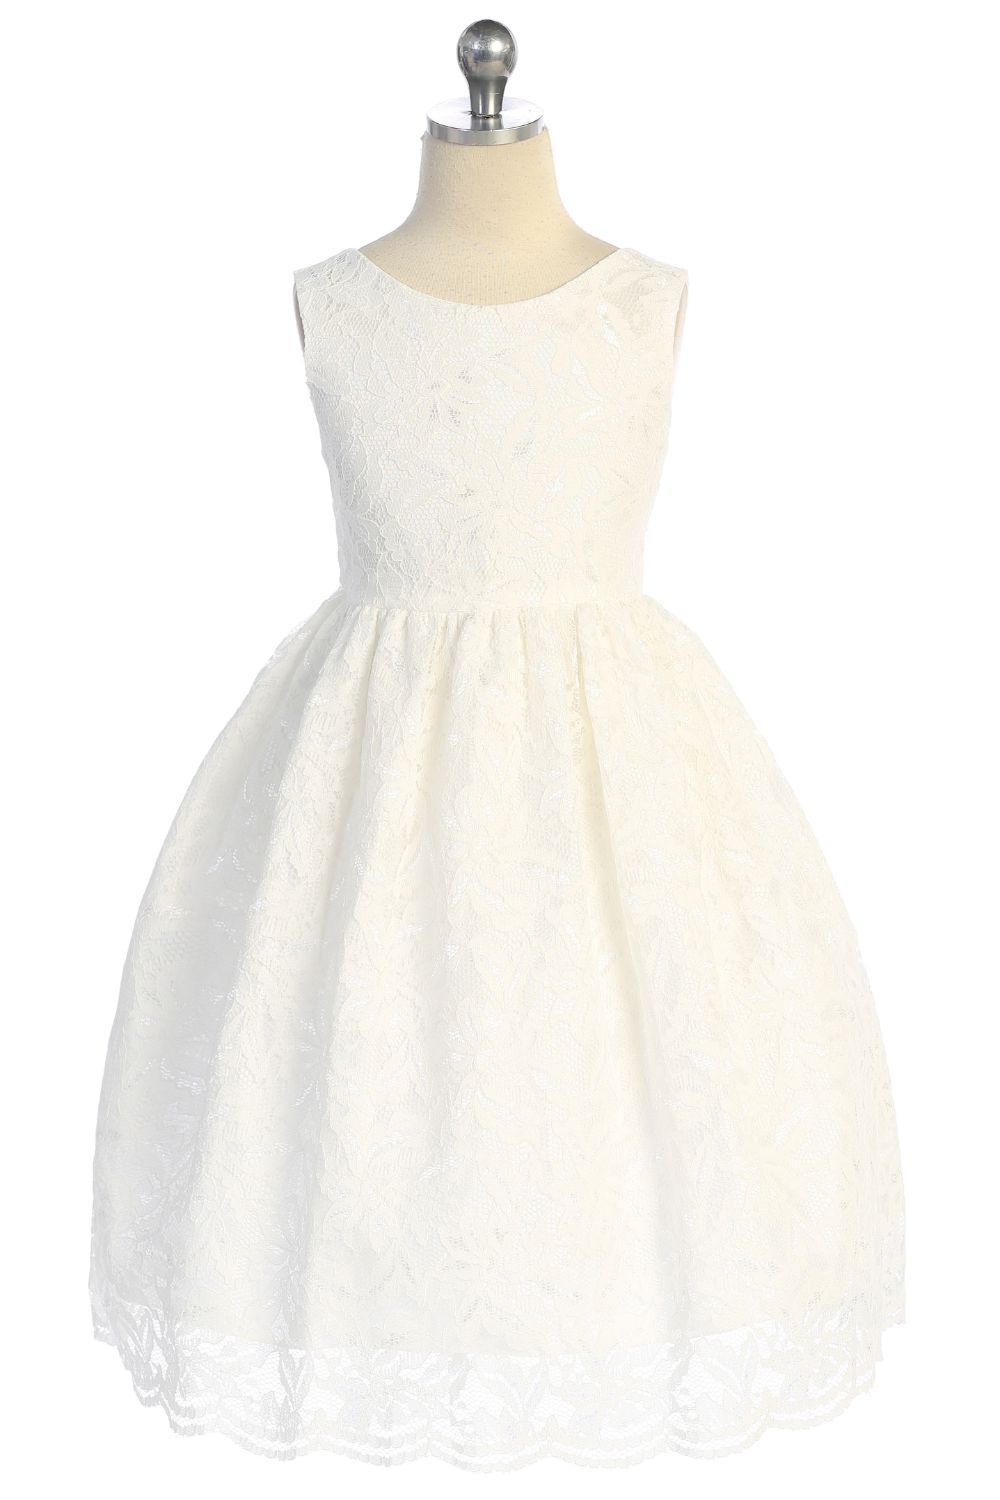 526 All Lace Girls Dress with V Back & Bow and Plus Sizes